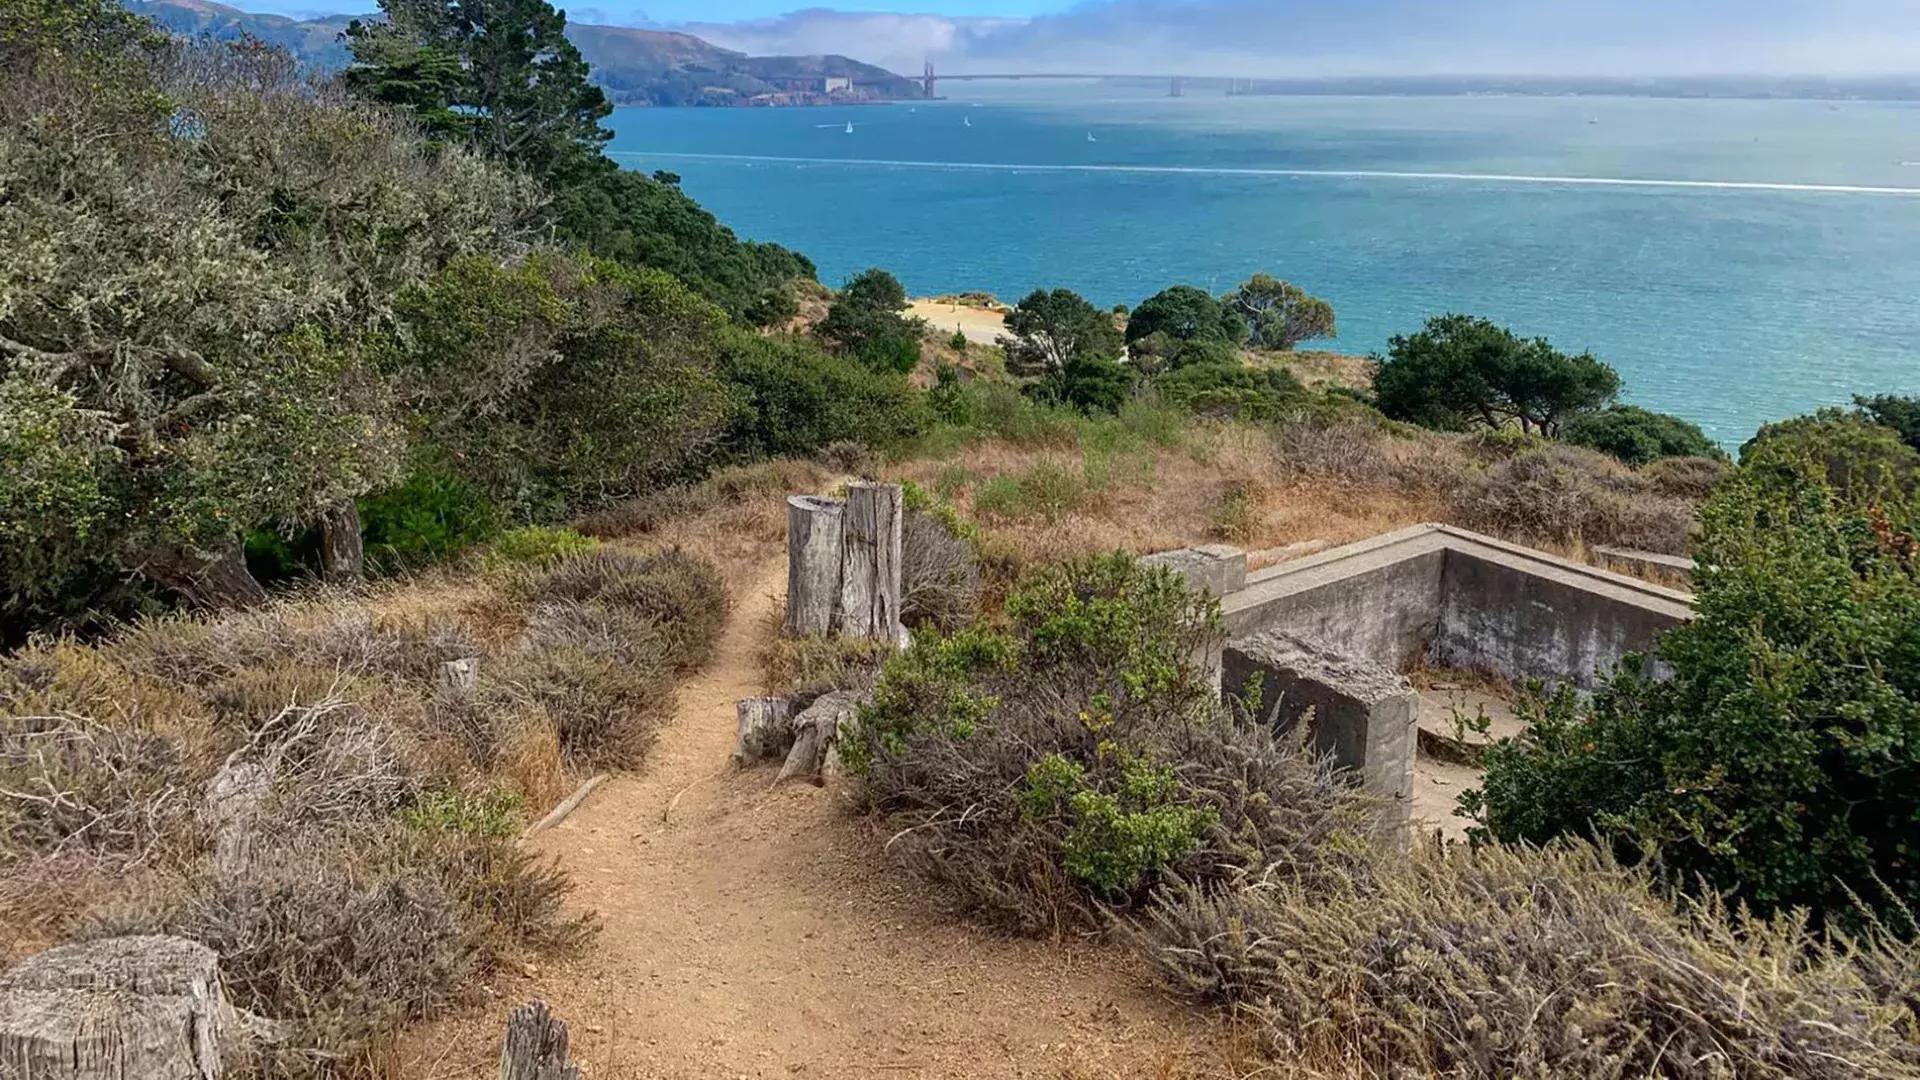 Campground at Angel Island State Park, overlooking the San Francisco Bay and Golden Gate Bridge